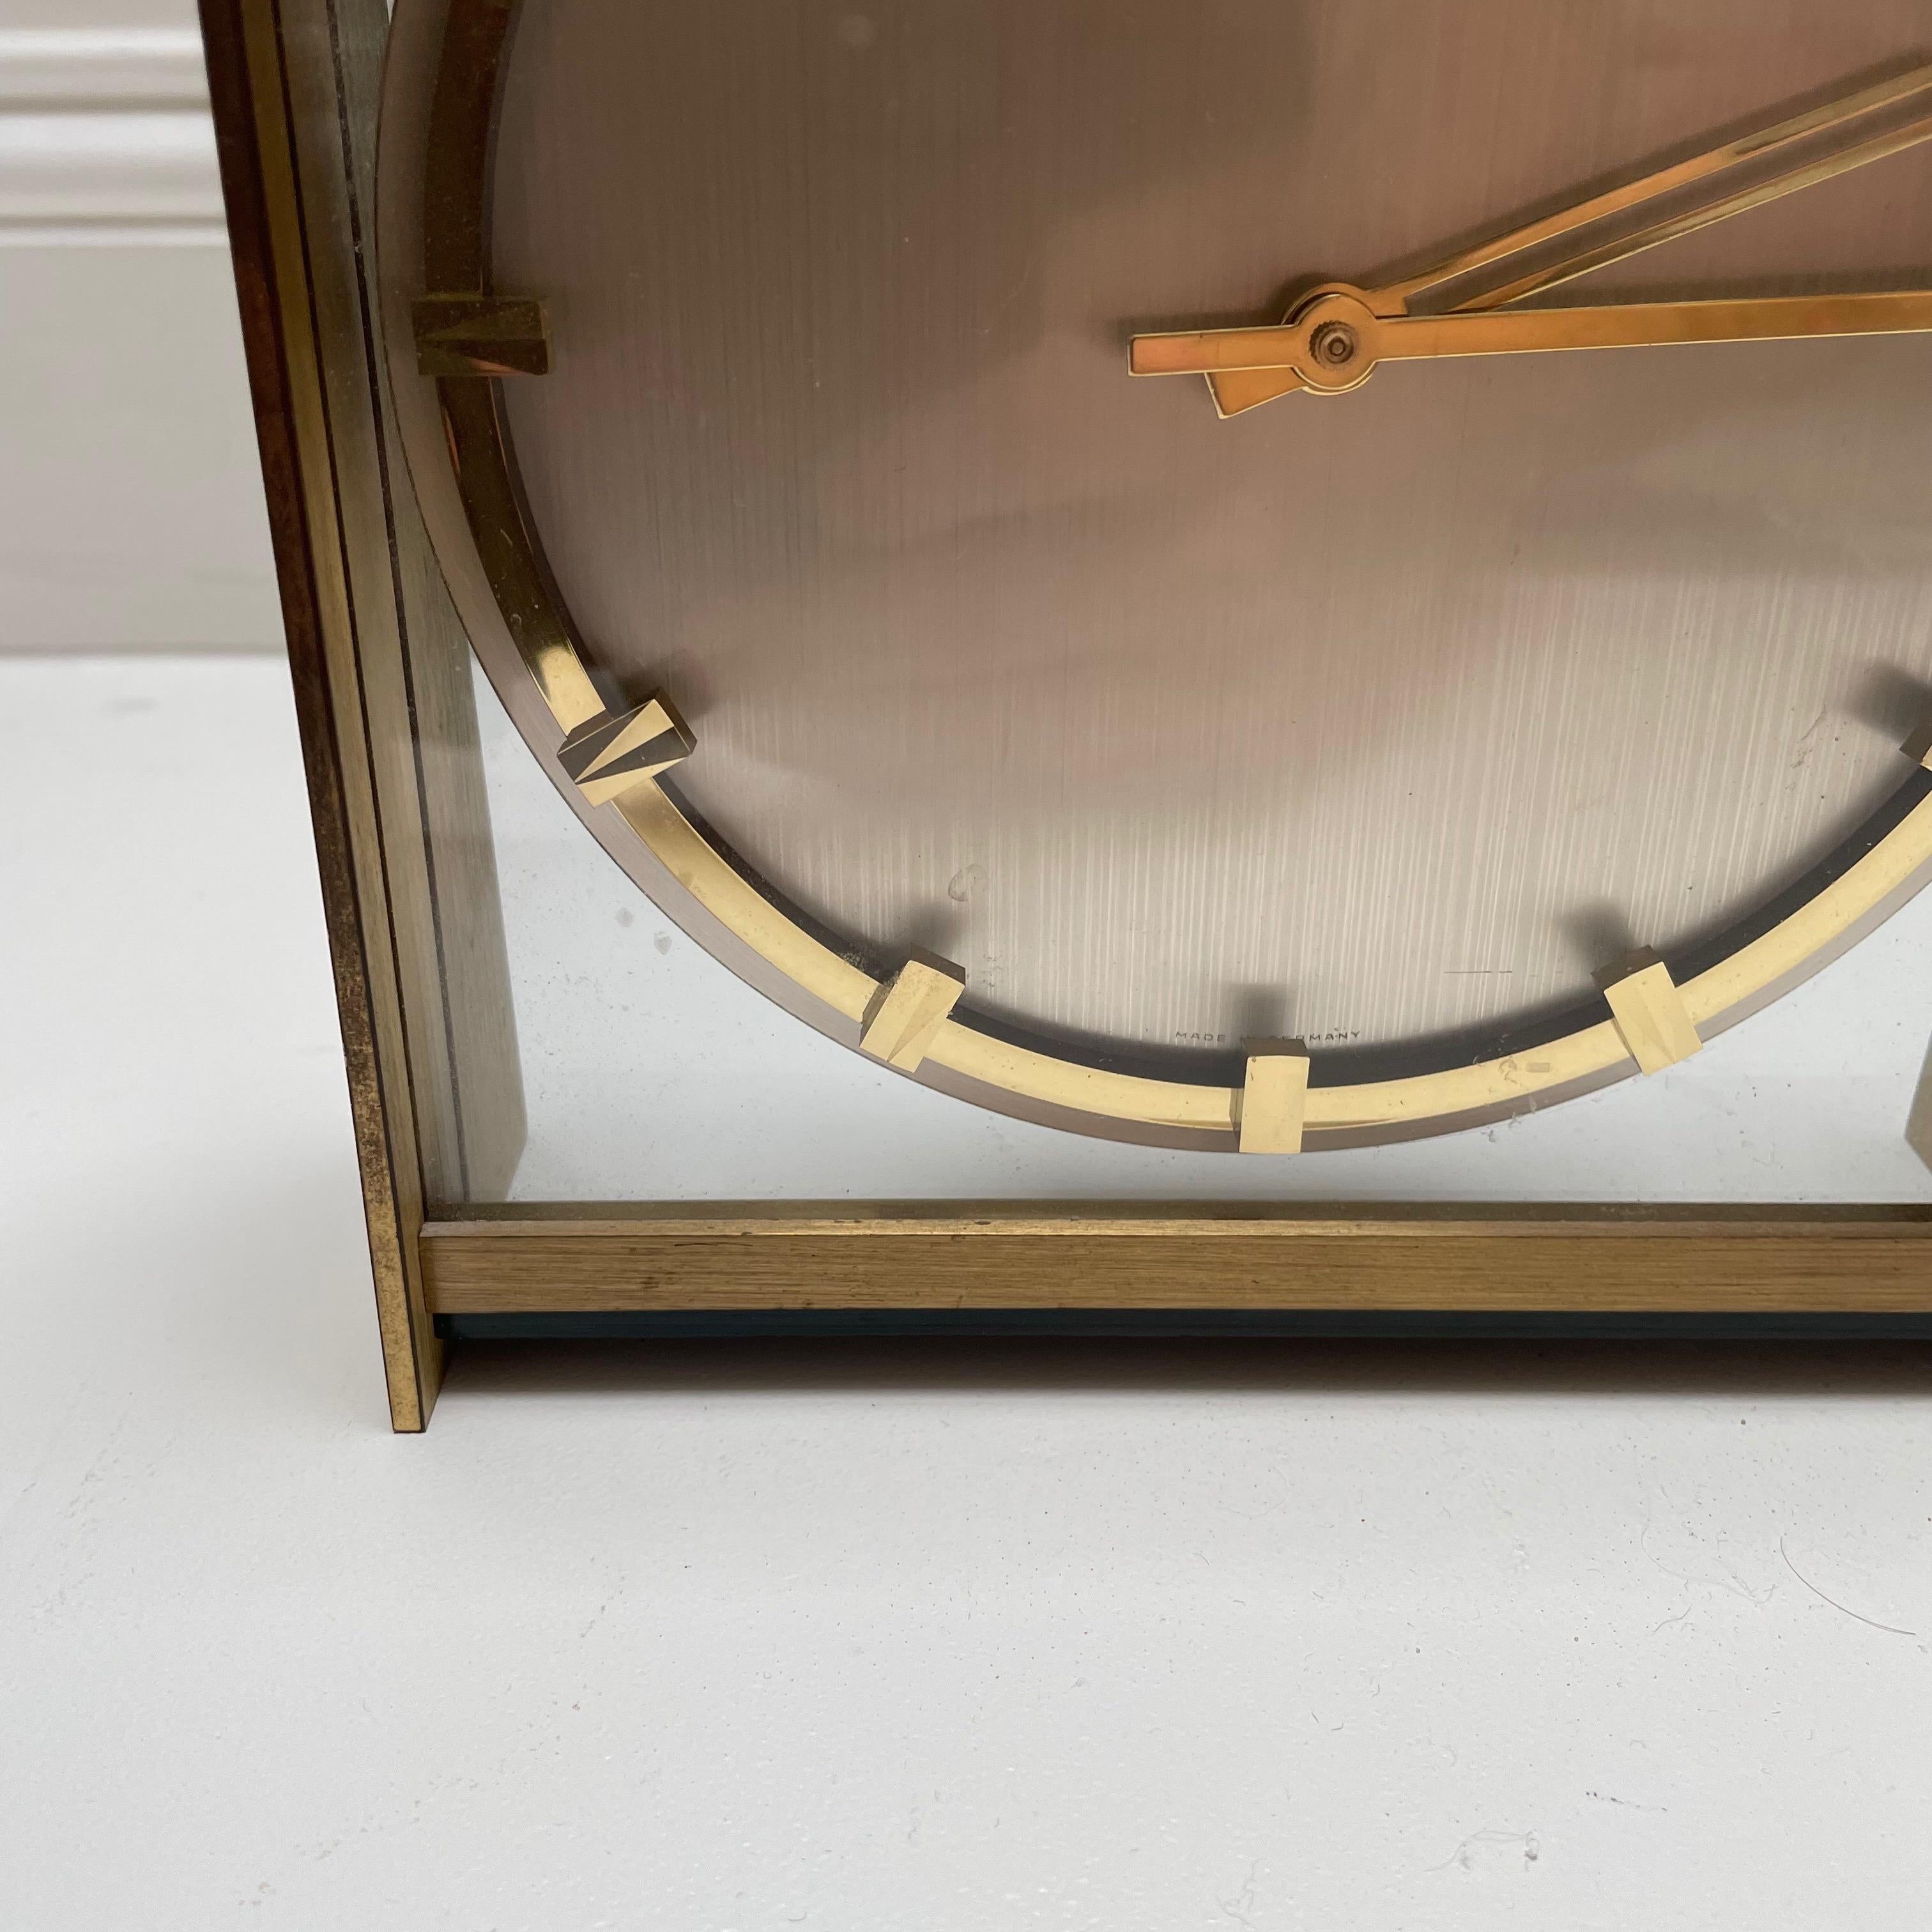 20th Century Vintage 1960s Hollywood Regency Brass Glass Table Clock by Kienzle, Germany For Sale